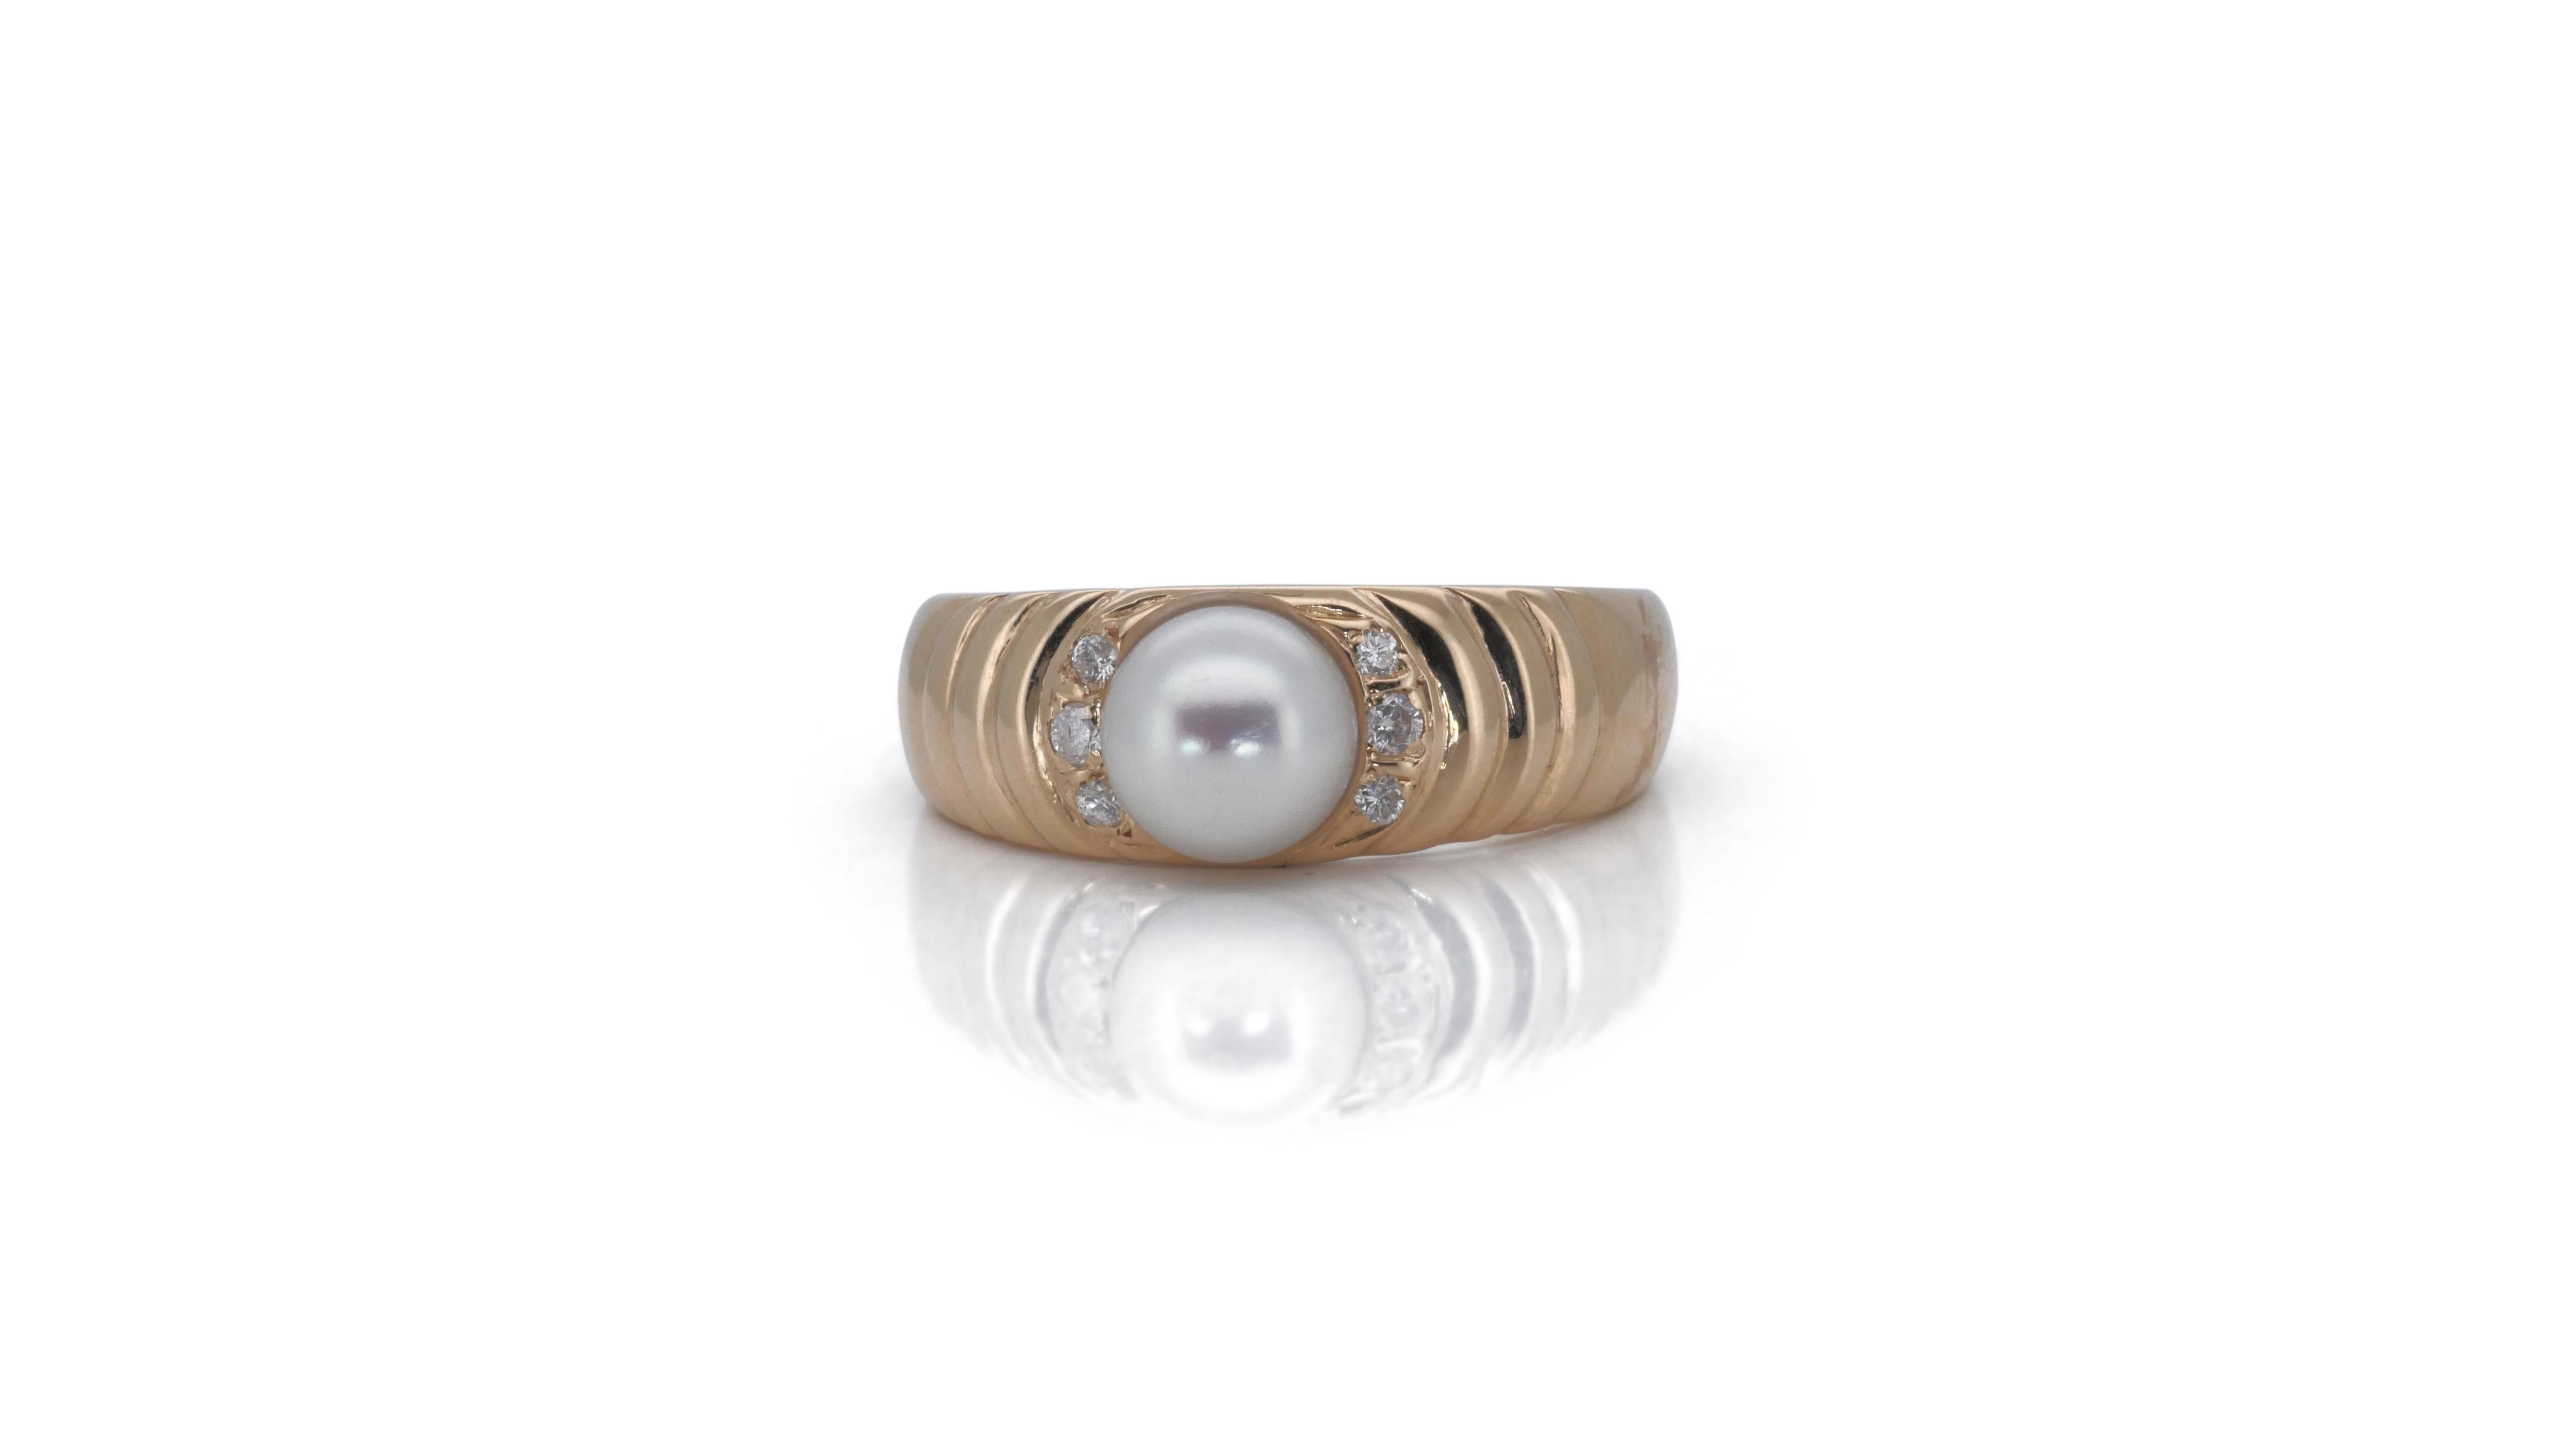 A gorgeous cluster ring with a dazzling 1 carat round brilliant natural pearl. It has 0.06 carat of side diamonds which add more to its elegance. The jewelry is made of 14k Yellow Gold with a high quality polish. It comes with a fancy jewelry